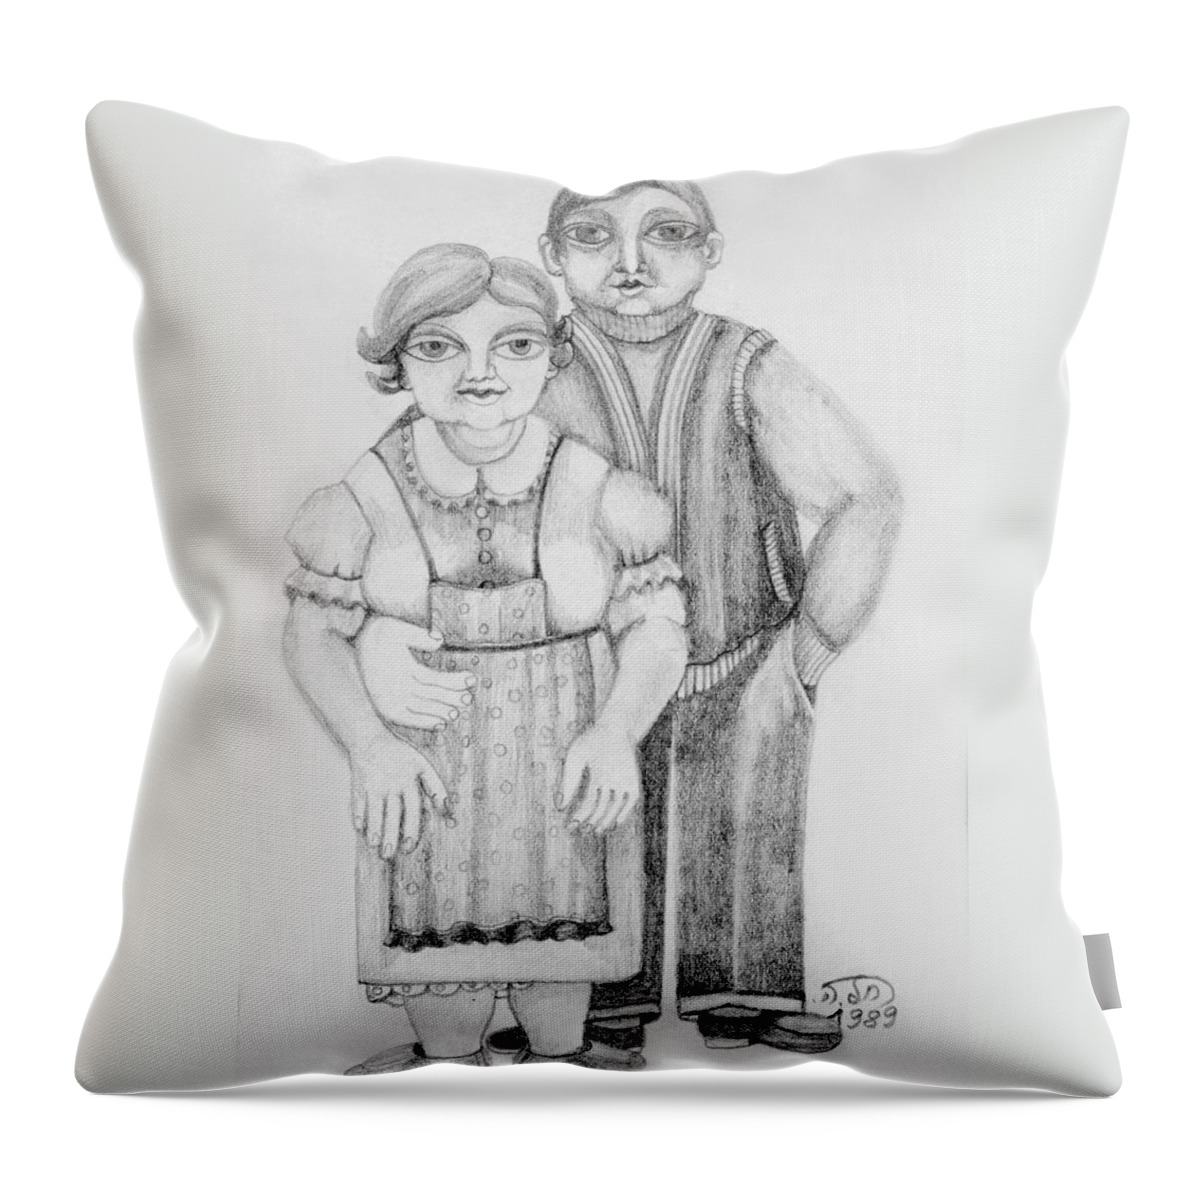 Couple Throw Pillow featuring the drawing Polish couple by Rachel Hershkovitz